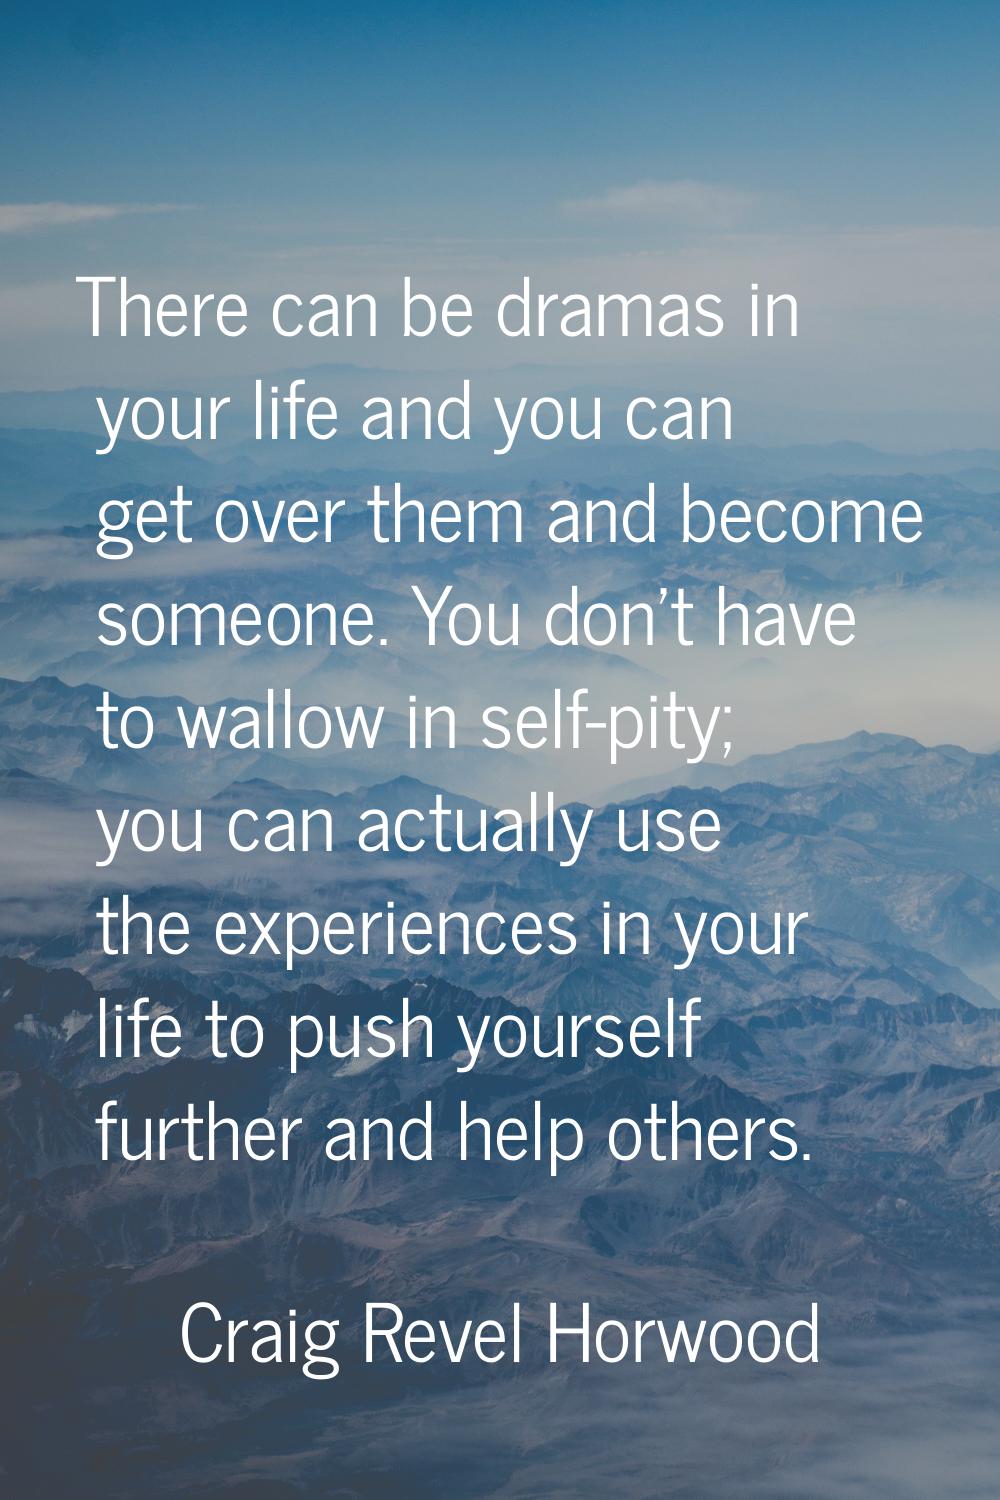 There can be dramas in your life and you can get over them and become someone. You don't have to wa